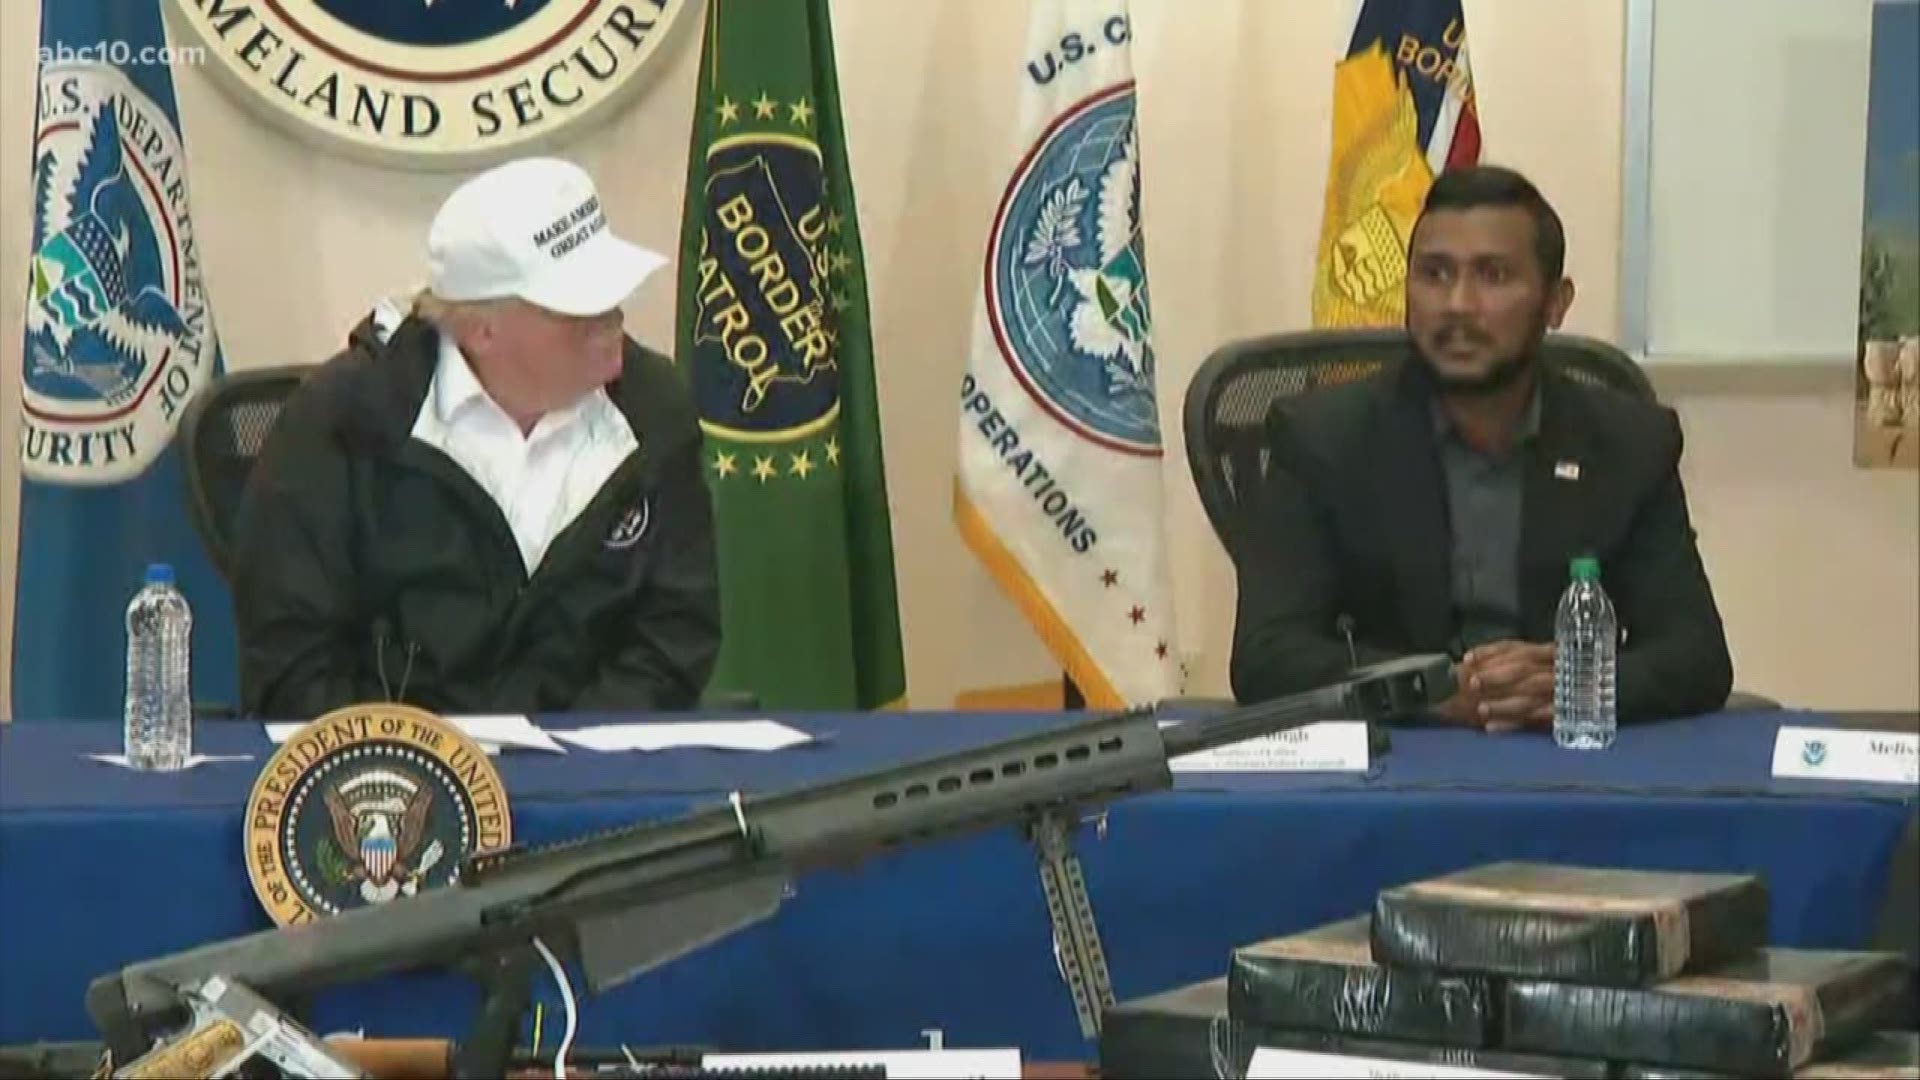 Only days after having to bury his brother, Reggie Singh was invited to be a part of the border security conversation with President Trump.